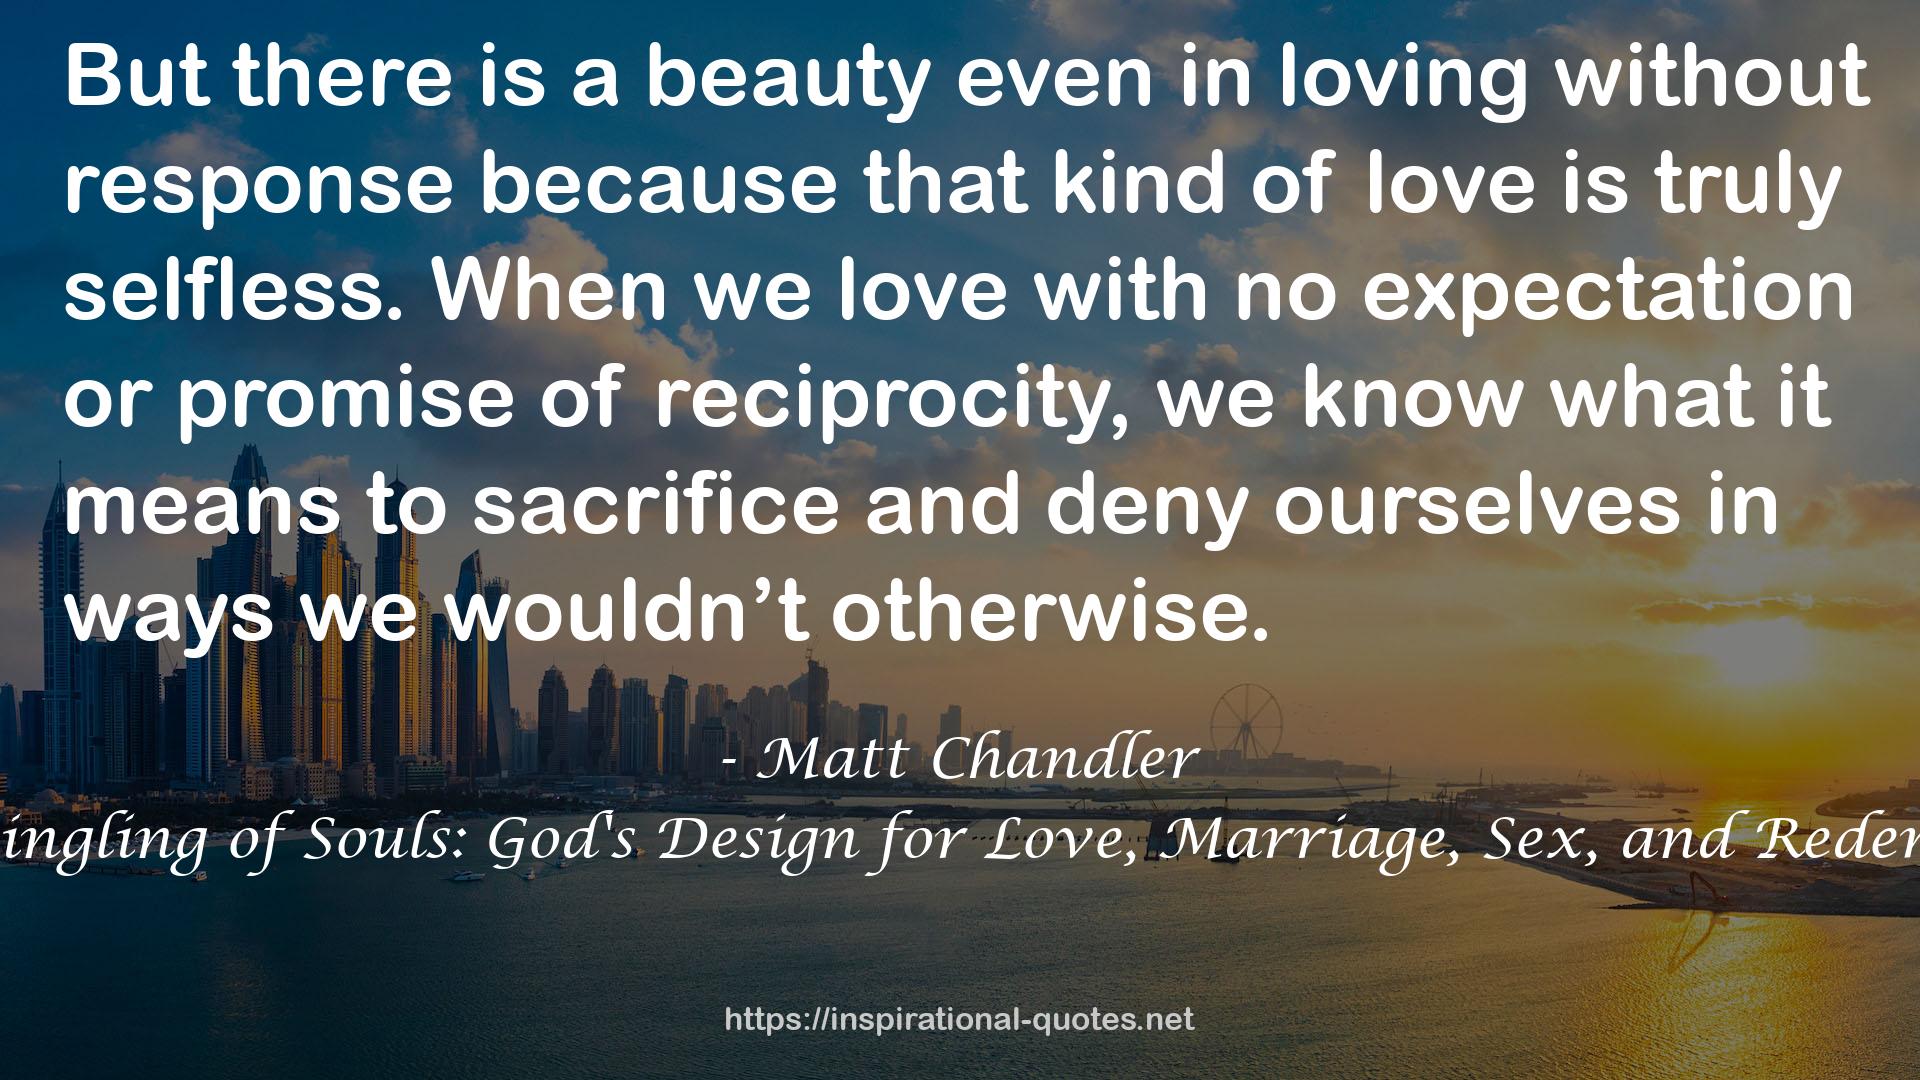 The Mingling of Souls: God's Design for Love, Marriage, Sex, and Redemption QUOTES